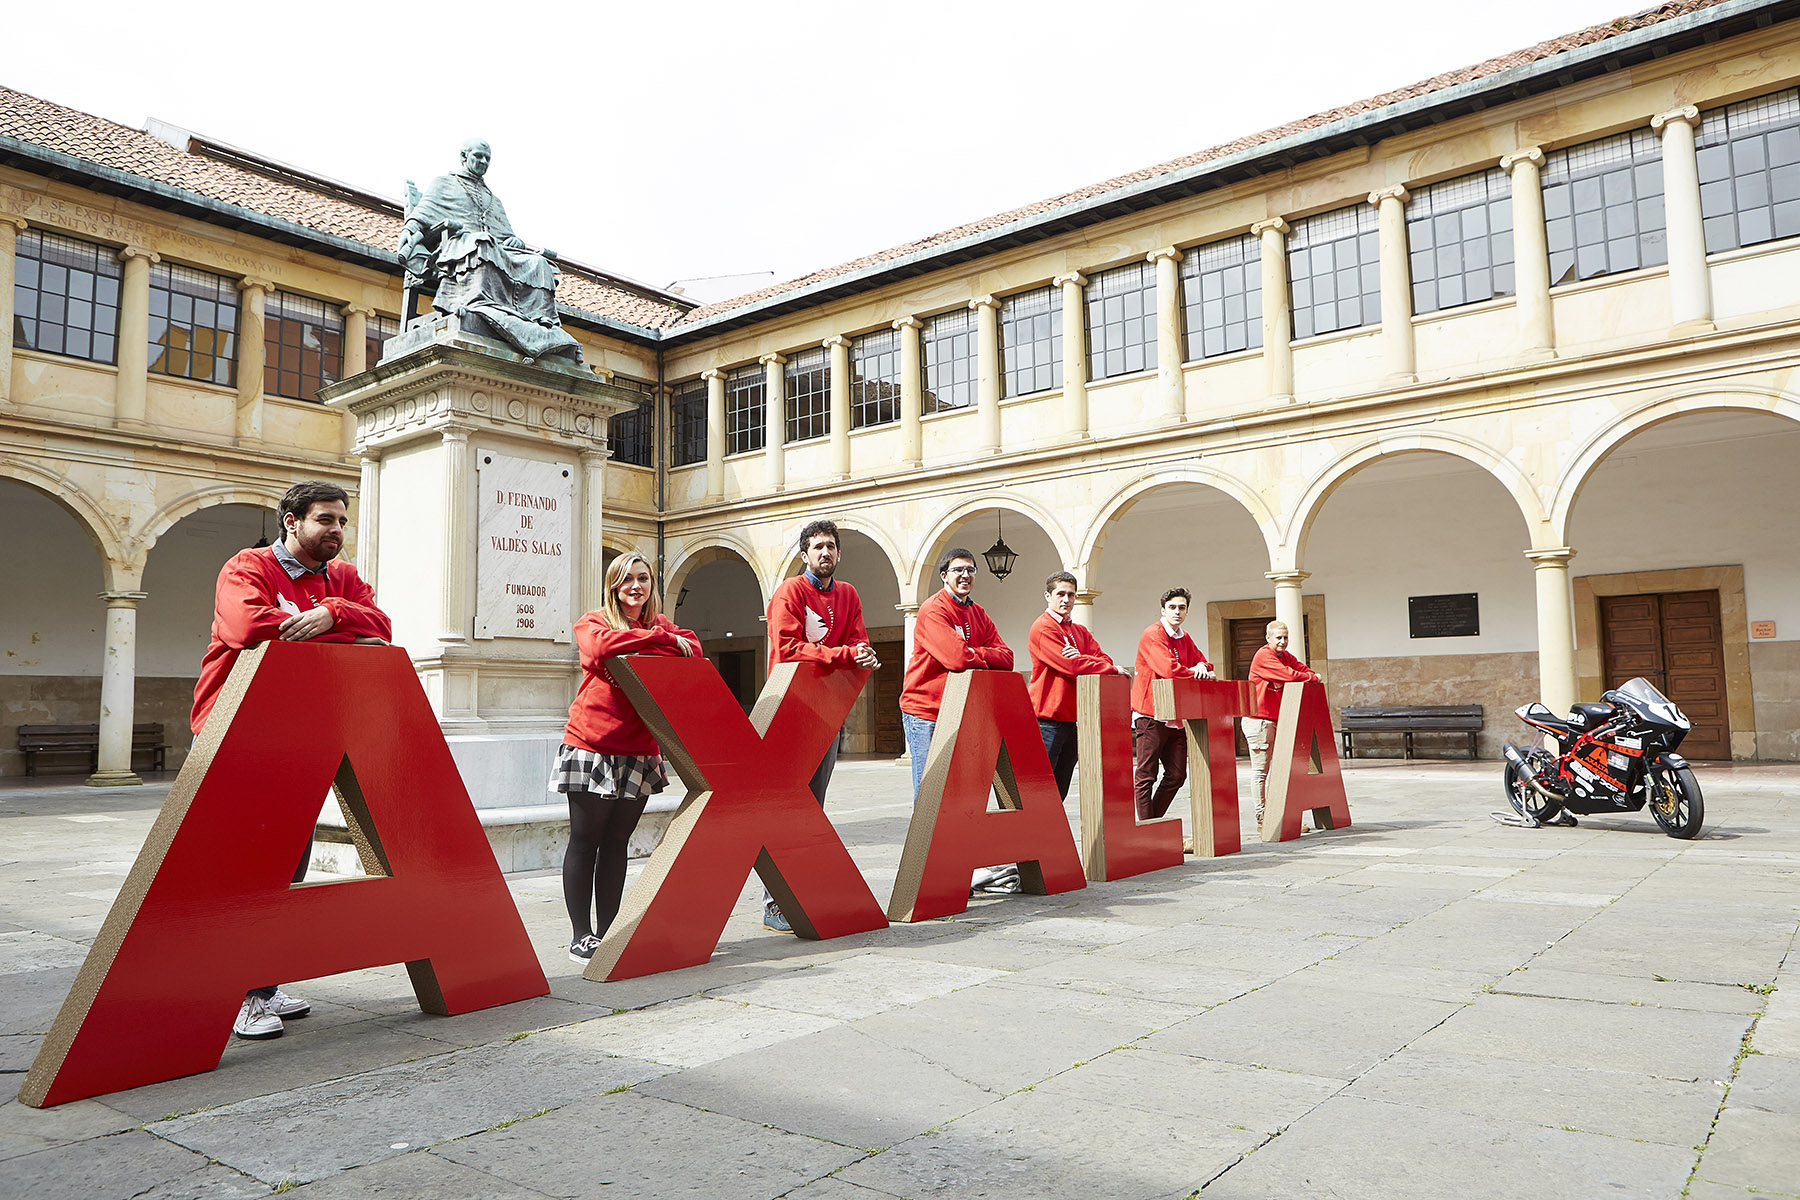 Oviedo event with big letter Axalta spelled out